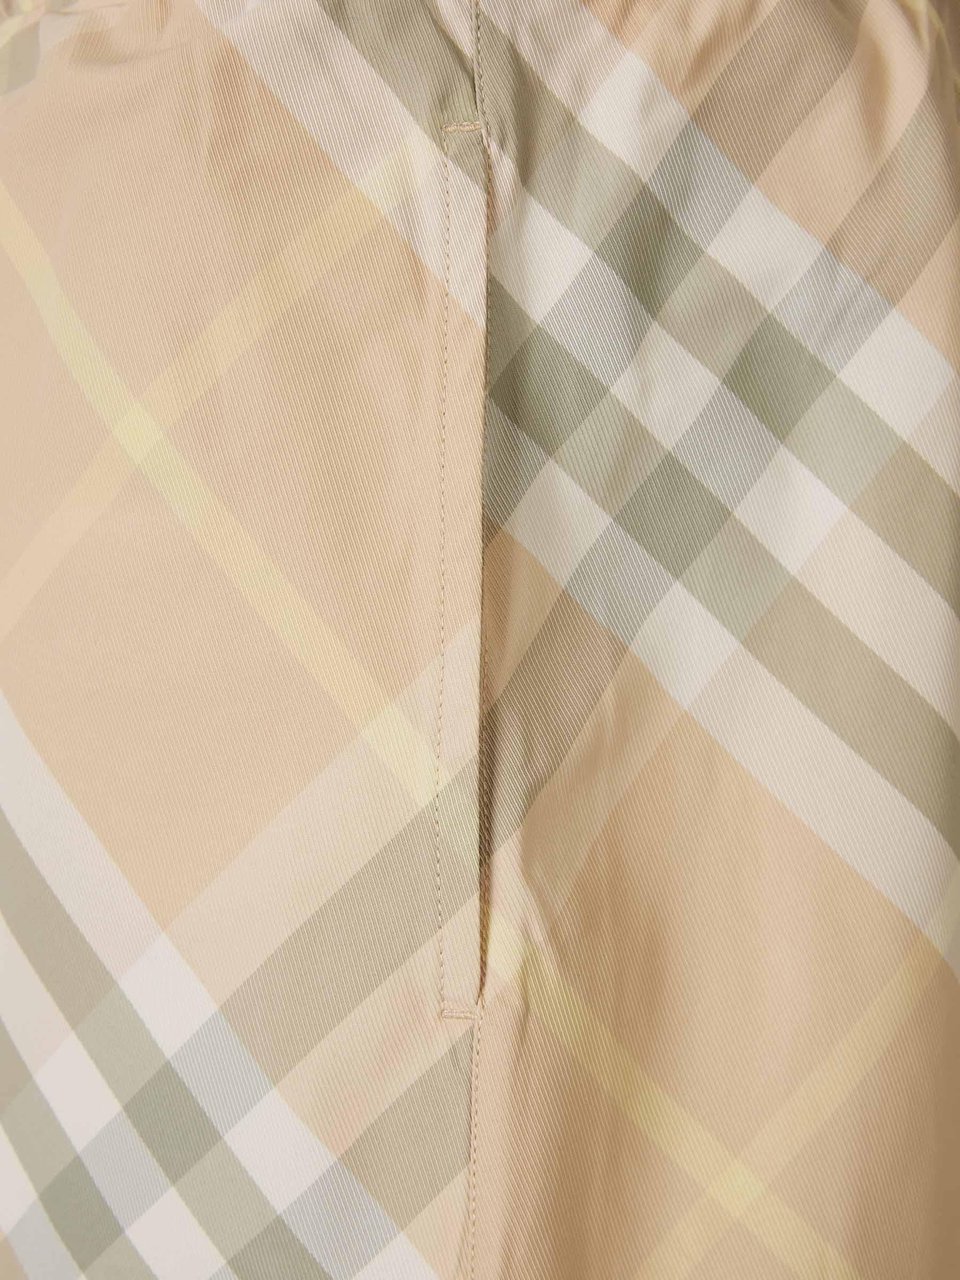 Burberry Checked Motif Swimsuit Beige